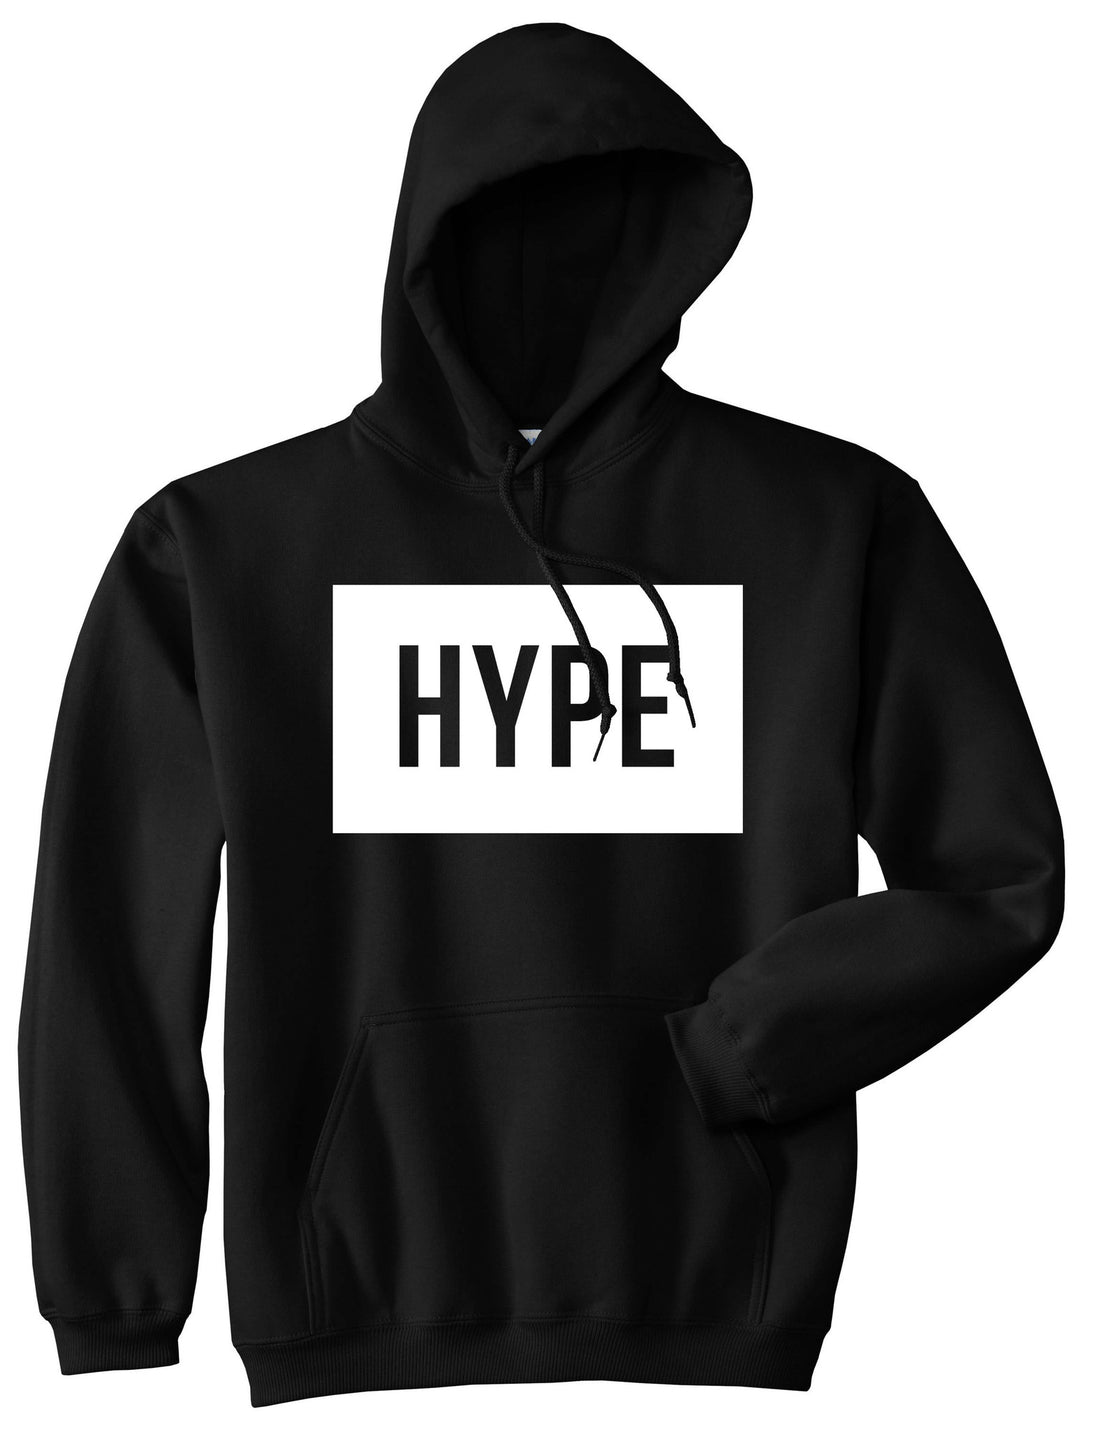 Hype Style Streetwear Brand Logo White by Kings Of NY Pullover Hoodie Hoody In Black by Kings Of NY